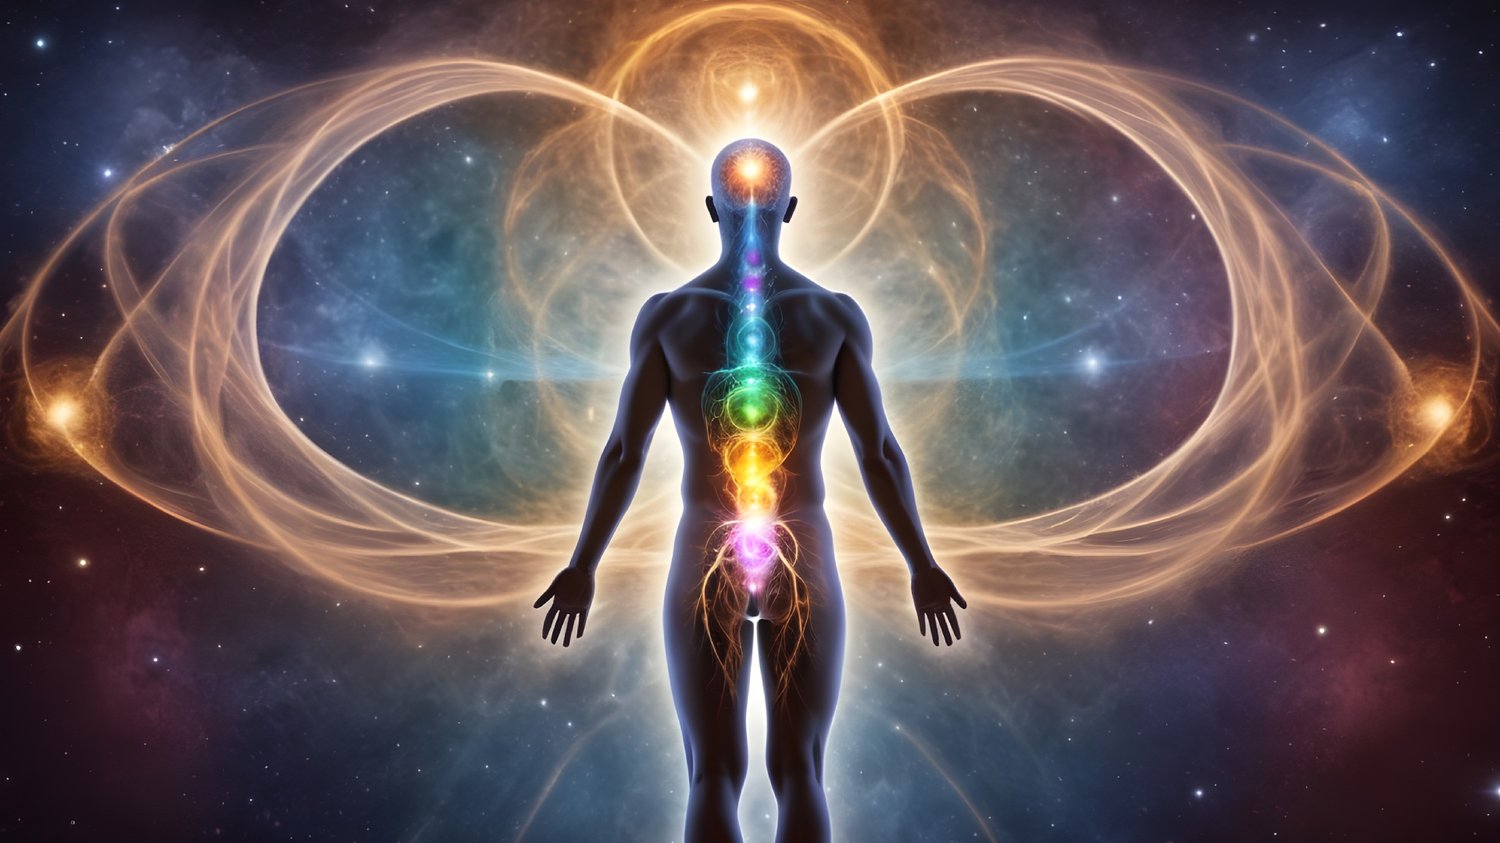 Human energy field and chakras in the cosmos